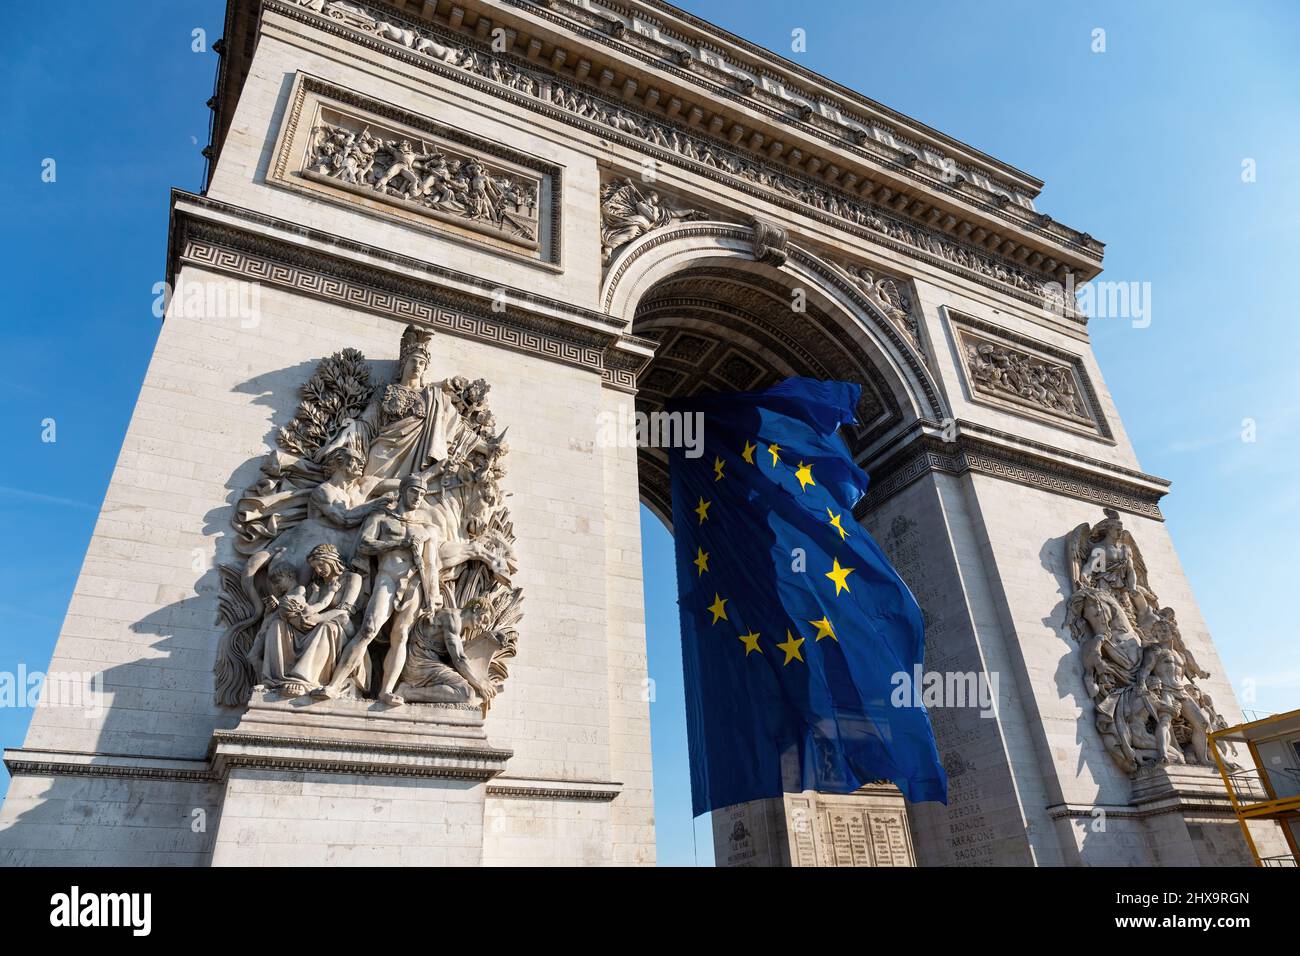 European Union flag flying in the wind under the Arc de Triomphe - Paris, France Stock Photo